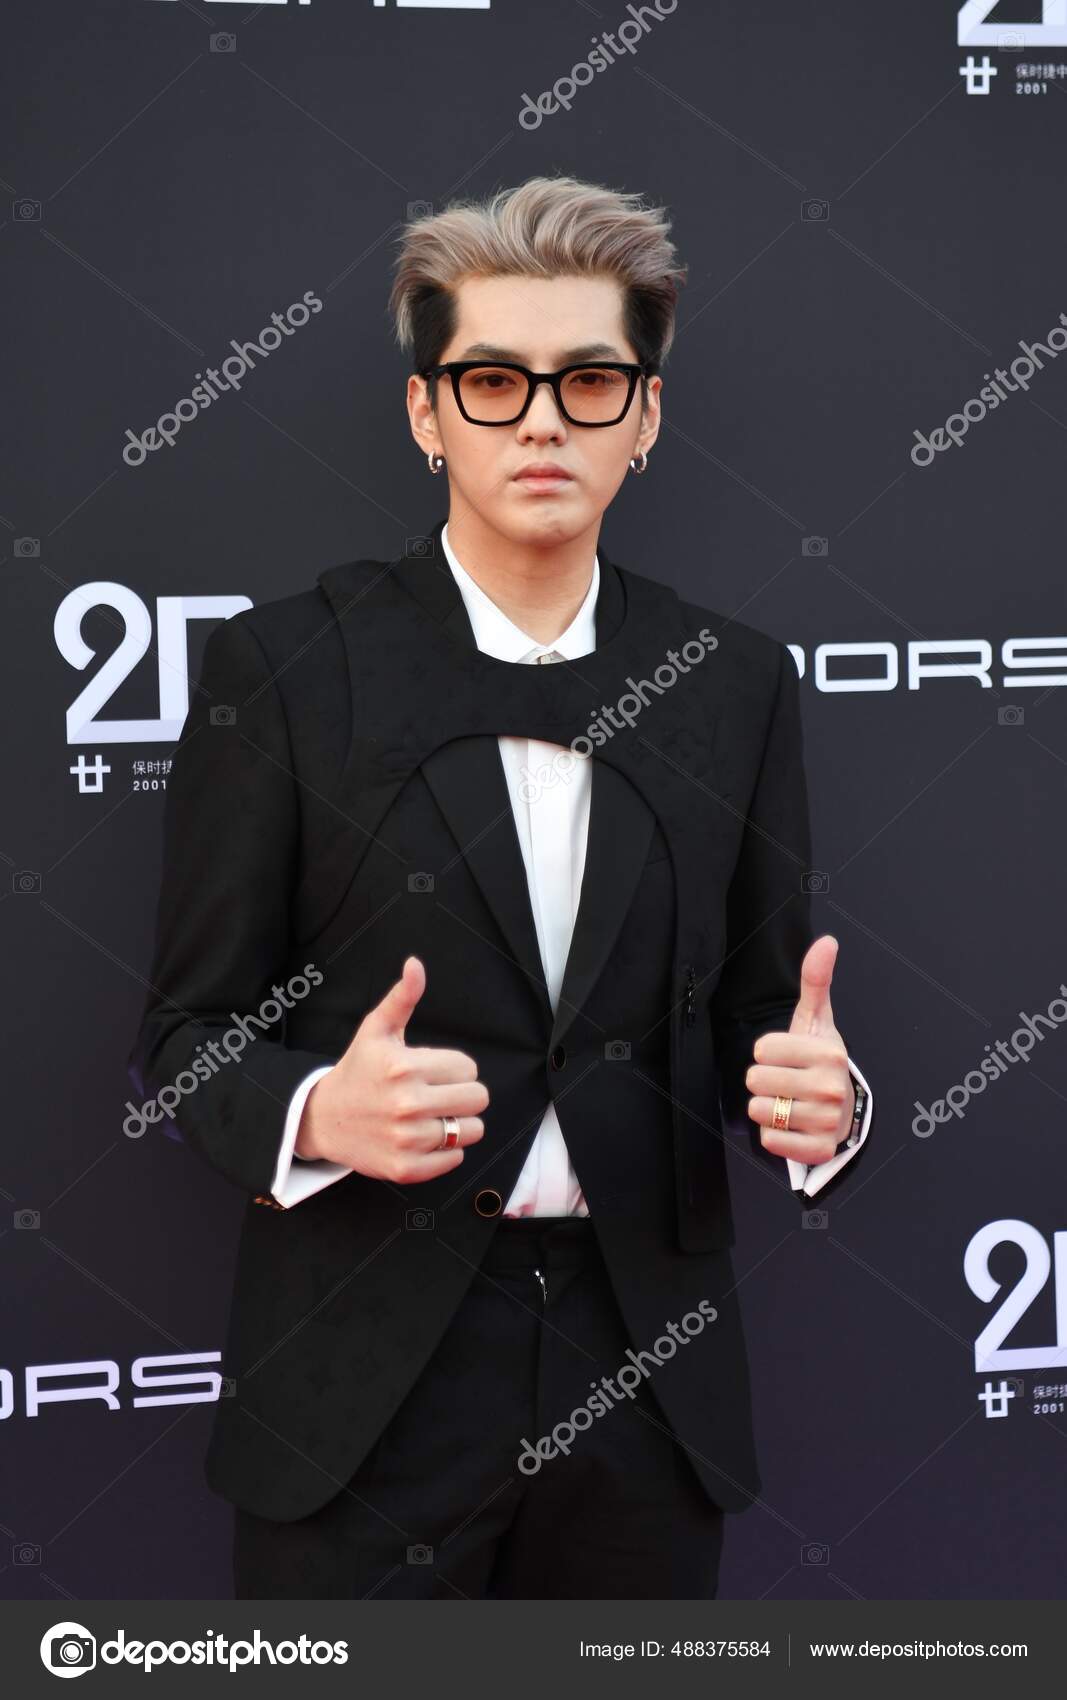 Canadian Actor Rapper Singer Record Producer Model Kris Attends Year –  Stock Editorial Photo © ChinaImages #494616098